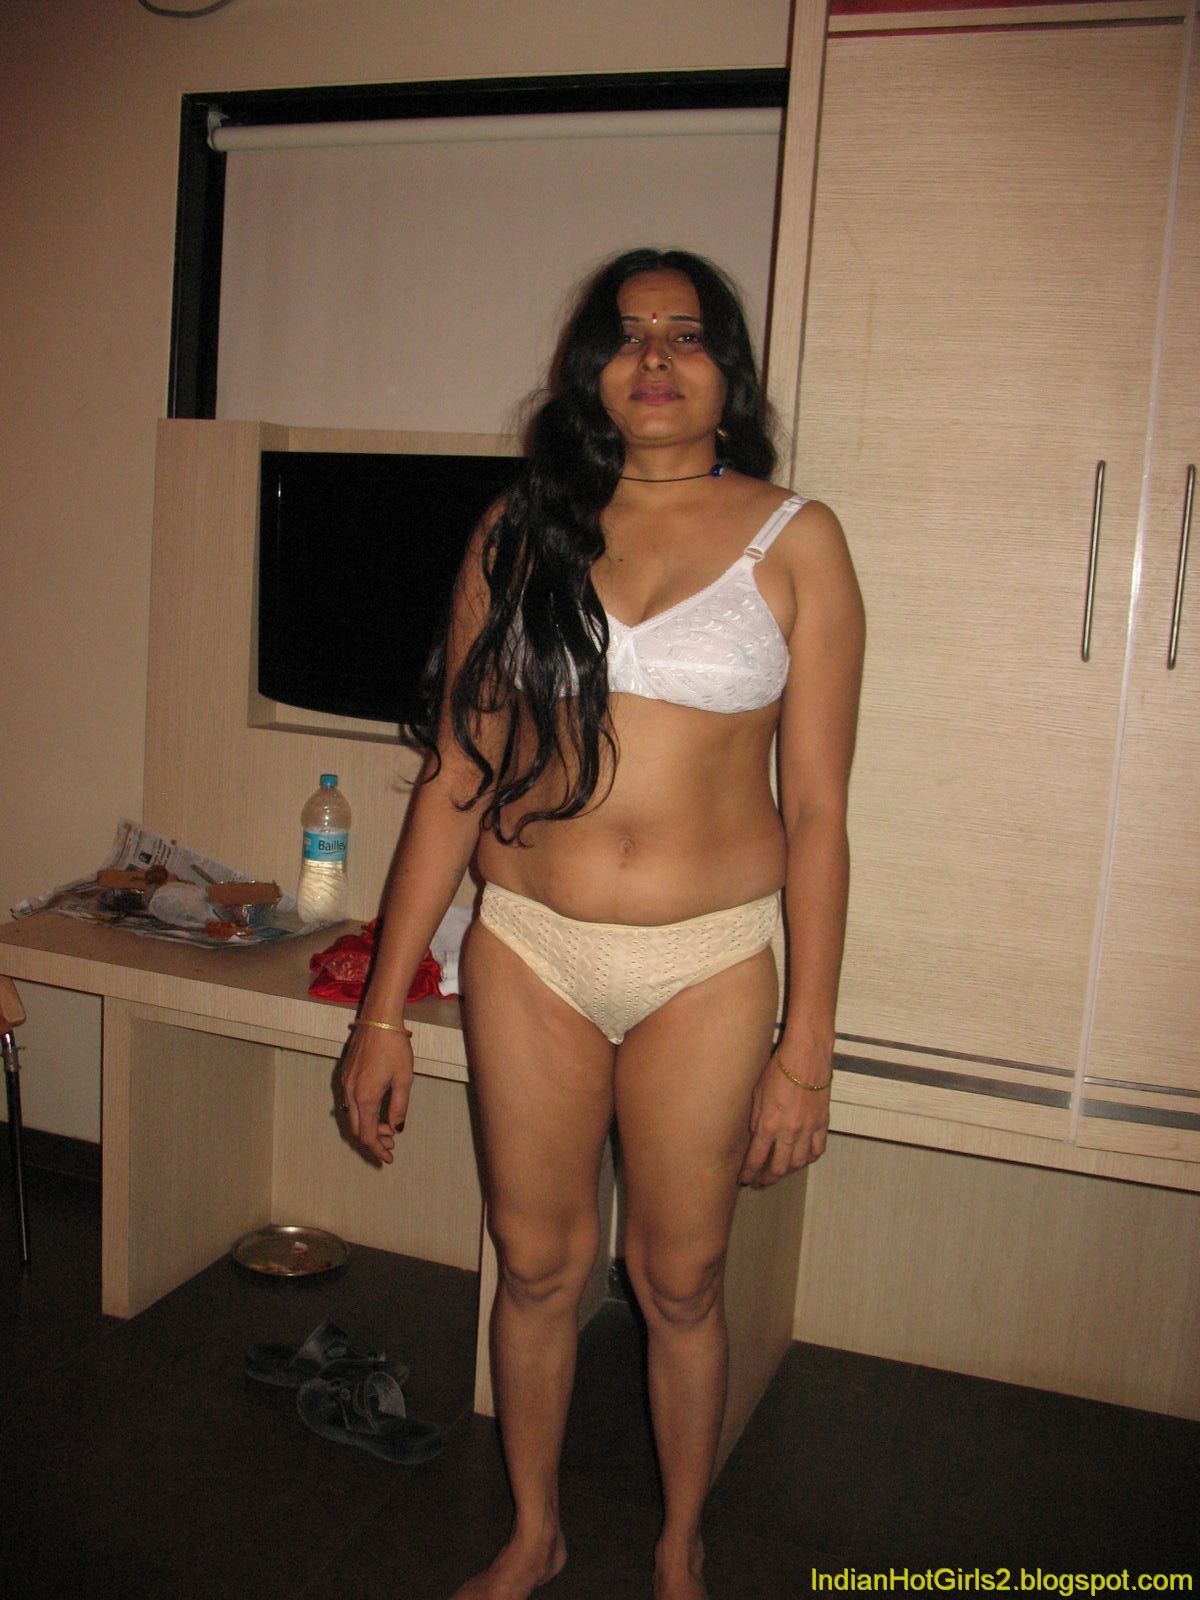 Cute Indian College Hot Girl Looking For Facebook Online